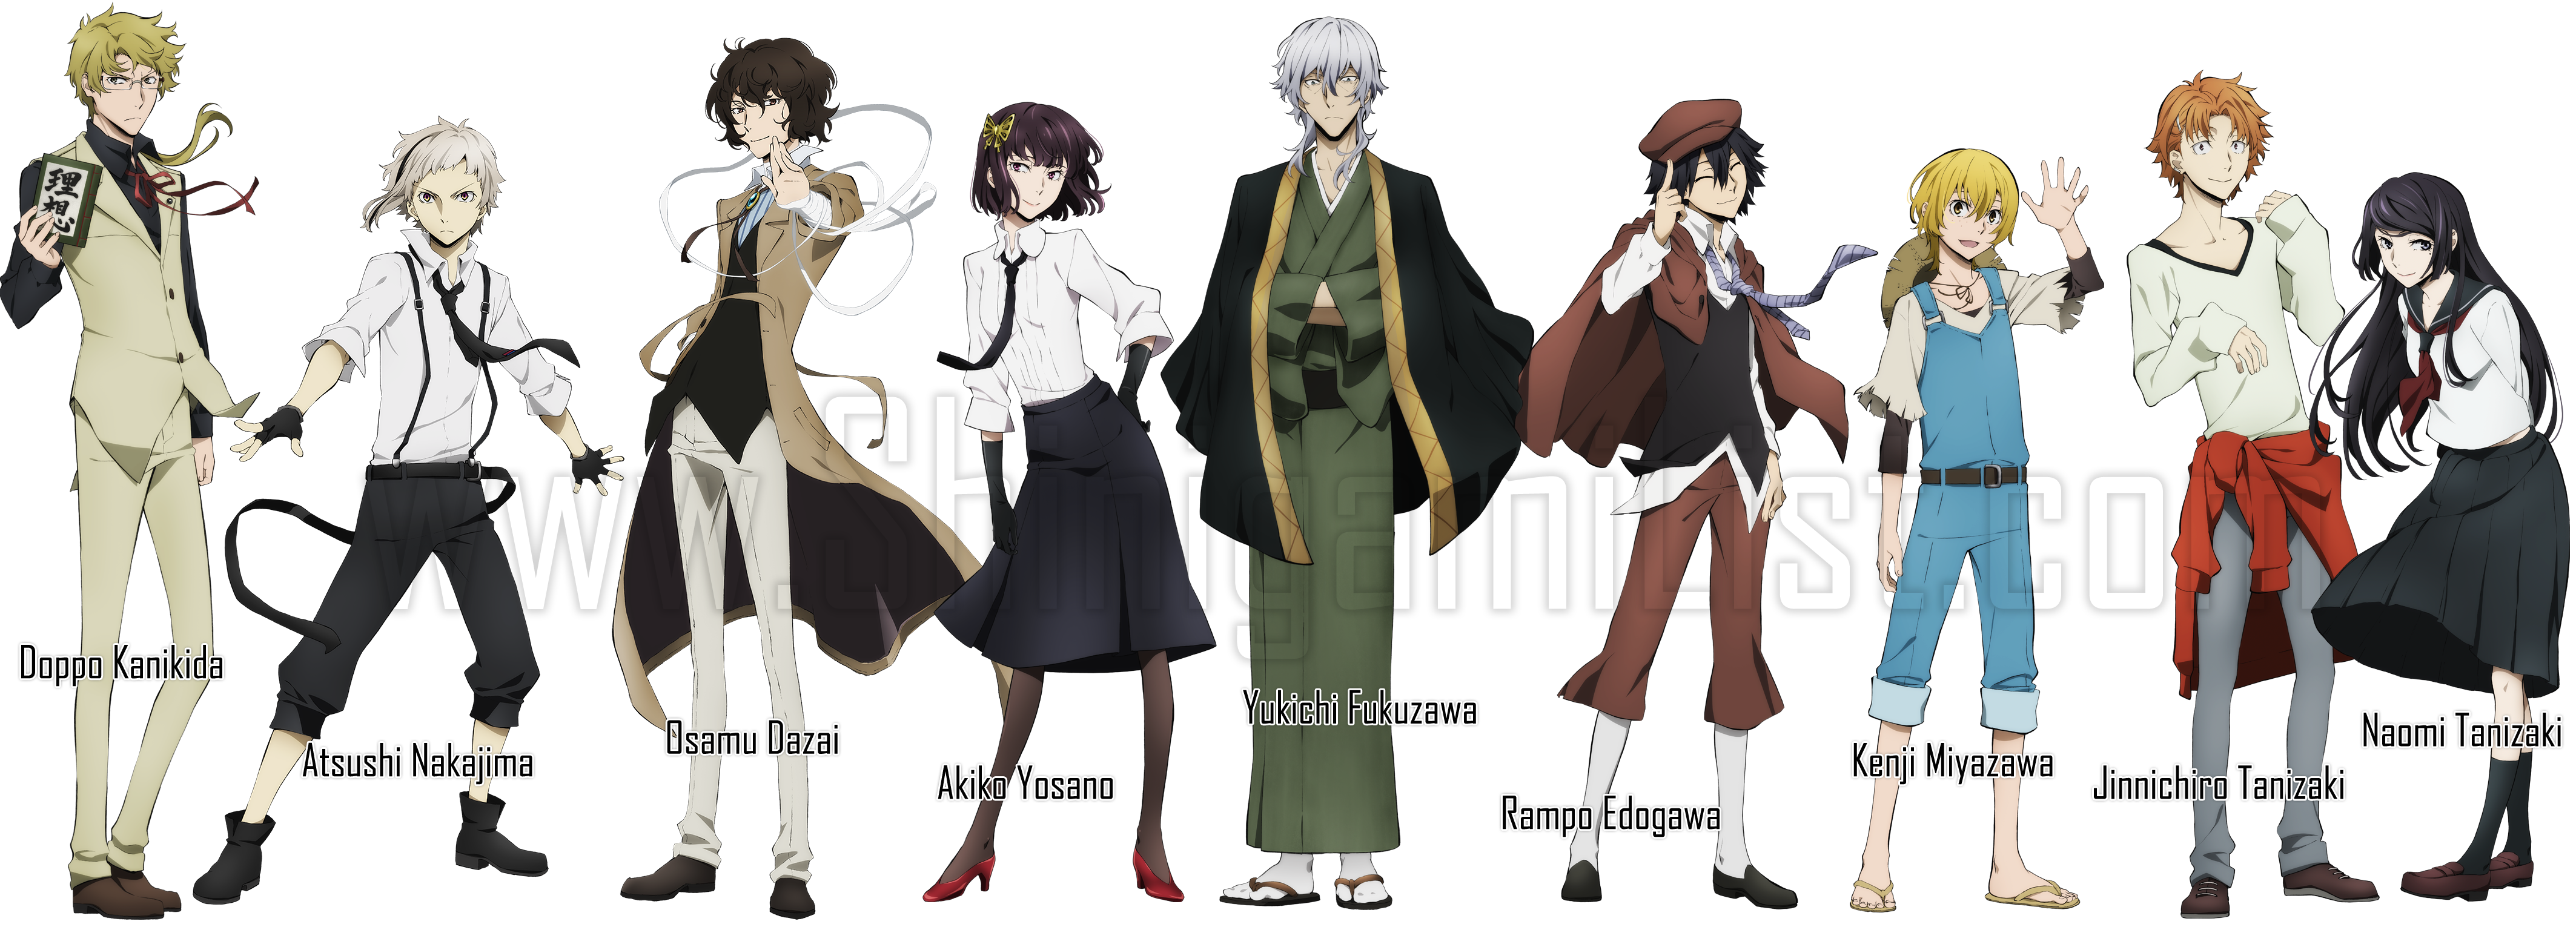 Images of Bungou Stray Dogs | 4253x1531